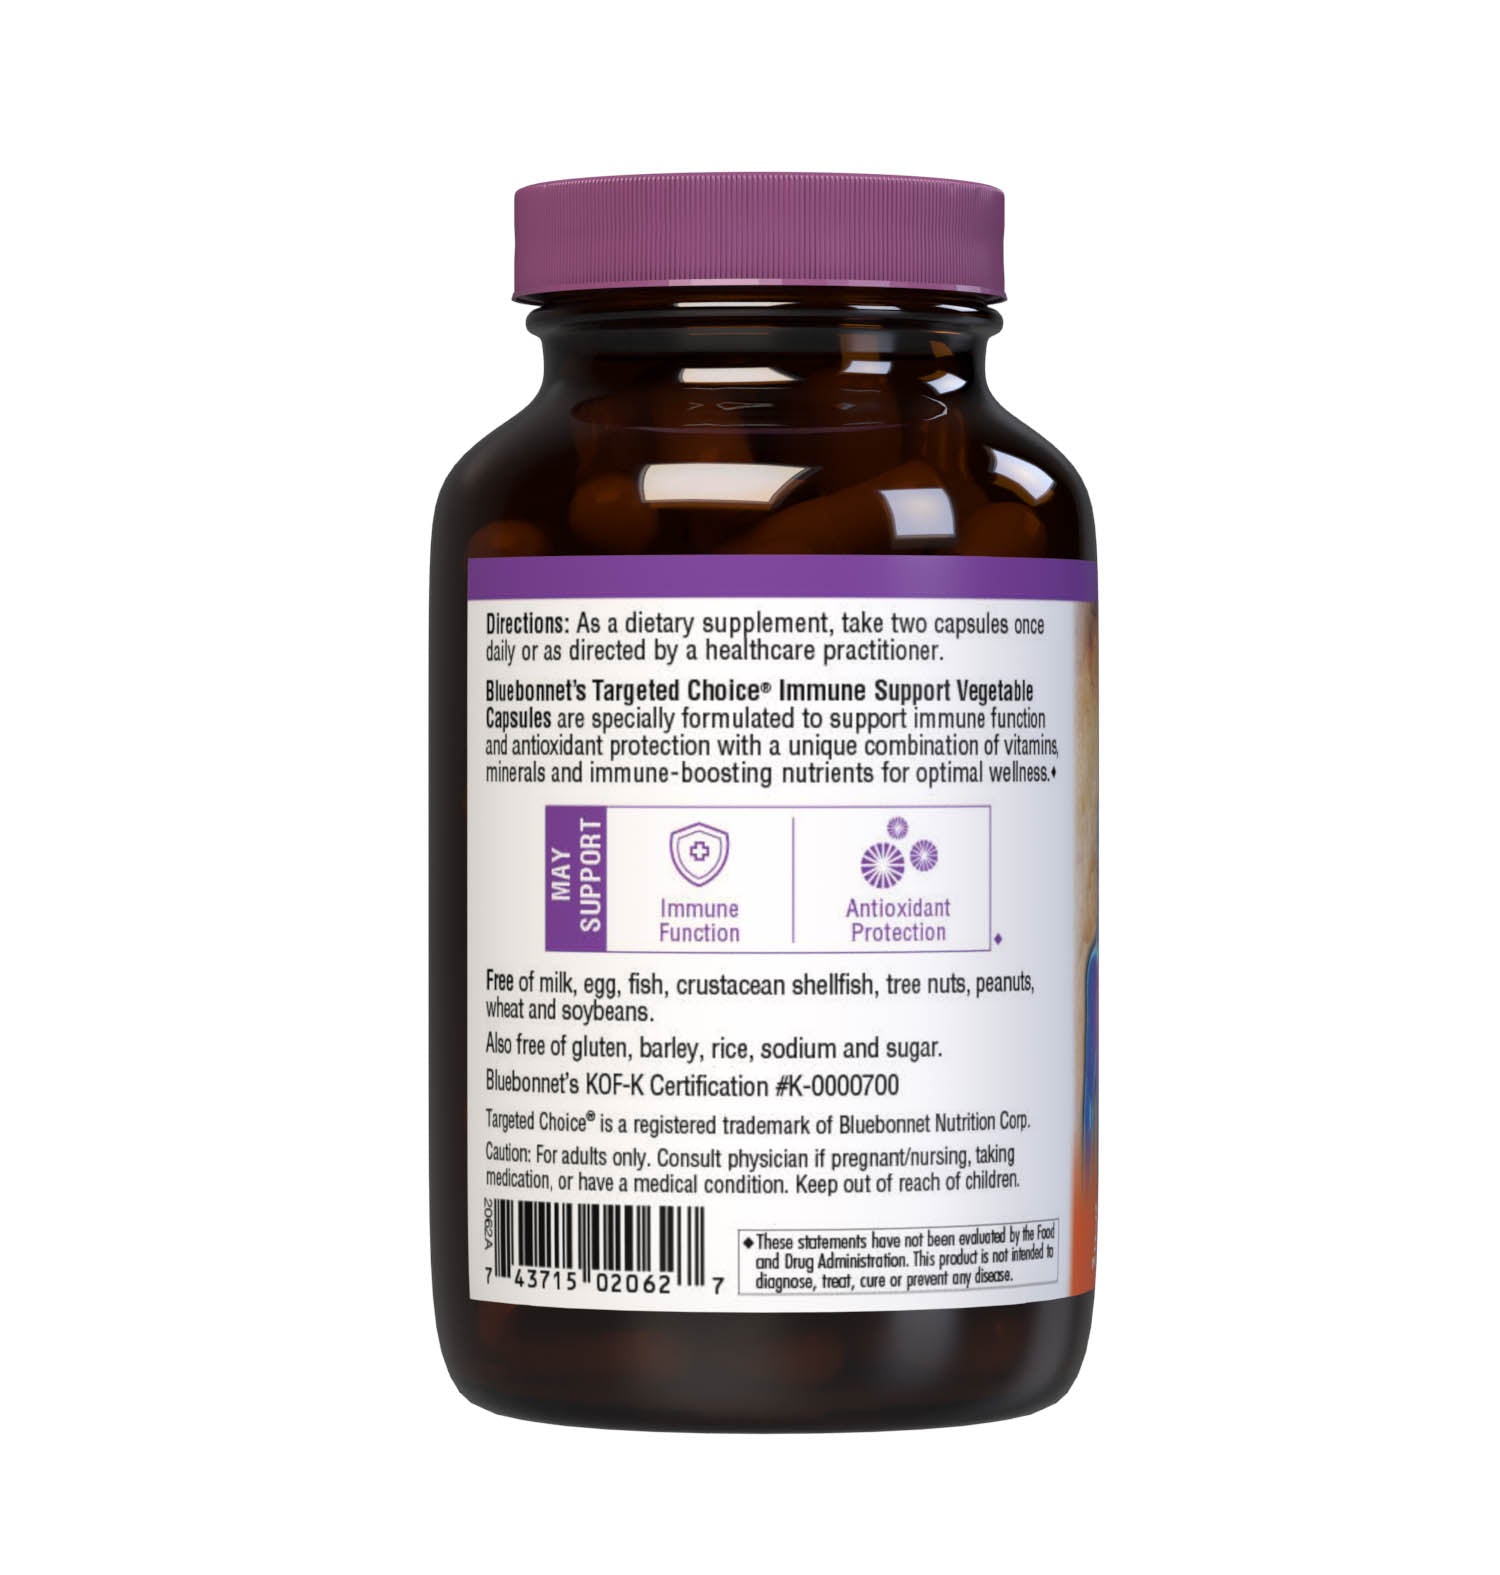 Bluebonnet’s Targeted Choice Immune Support 60 Vegetable Capsules are specially formulated to support immune function and antioxidant protection with a unique combination of vitamins, minerals and immune-boosting nutrients for optimal wellness. Description panel. #size_60 count